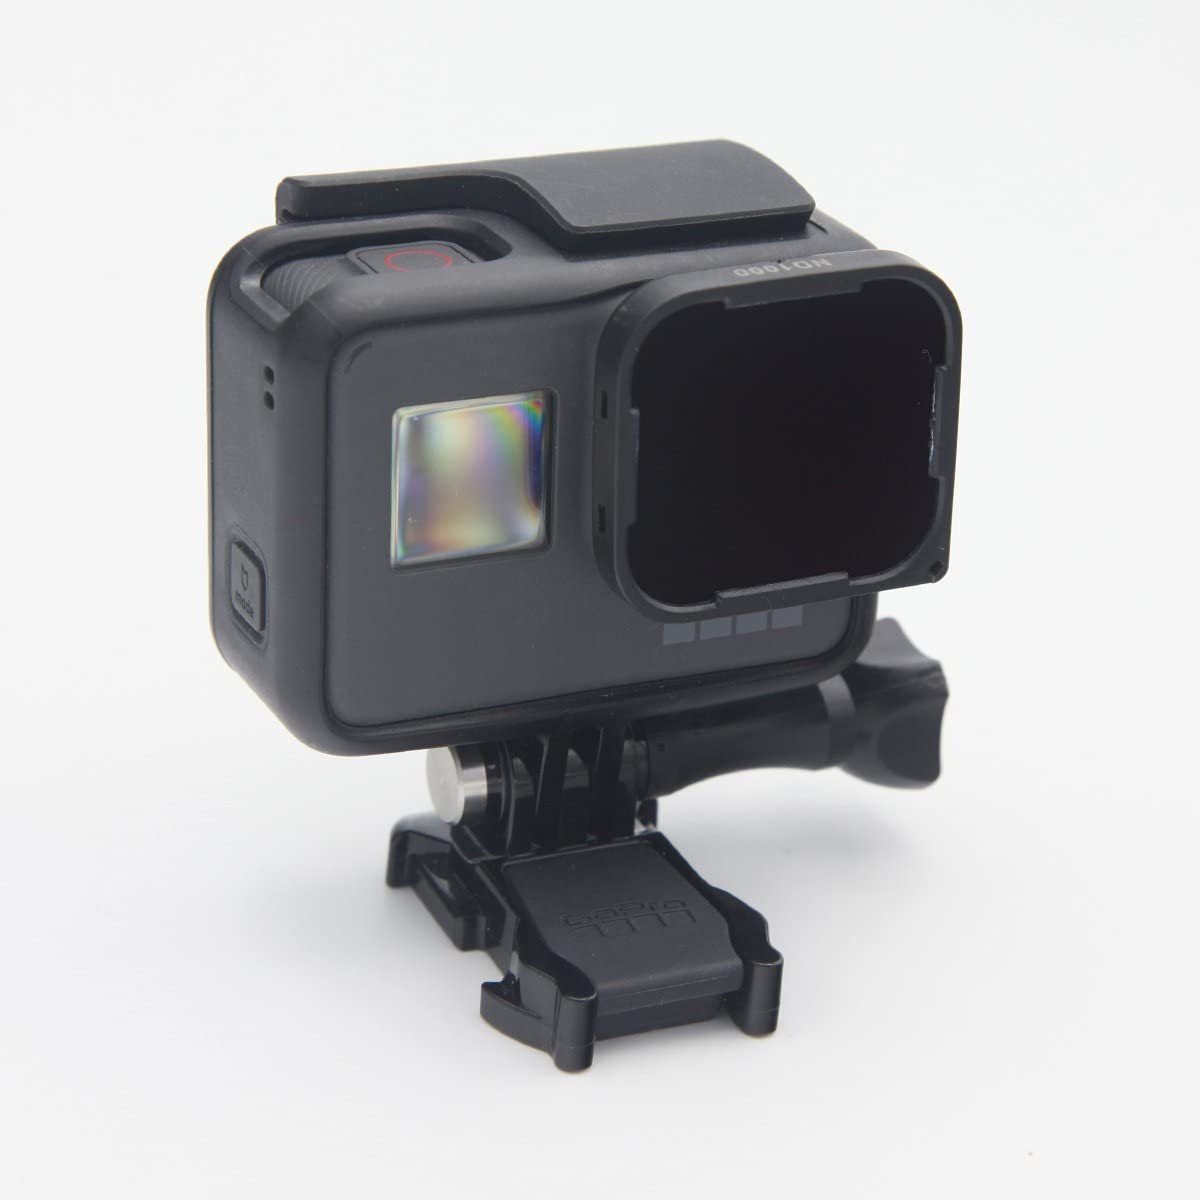 Freewell Gear: Filtro ND 1000 per GoPro